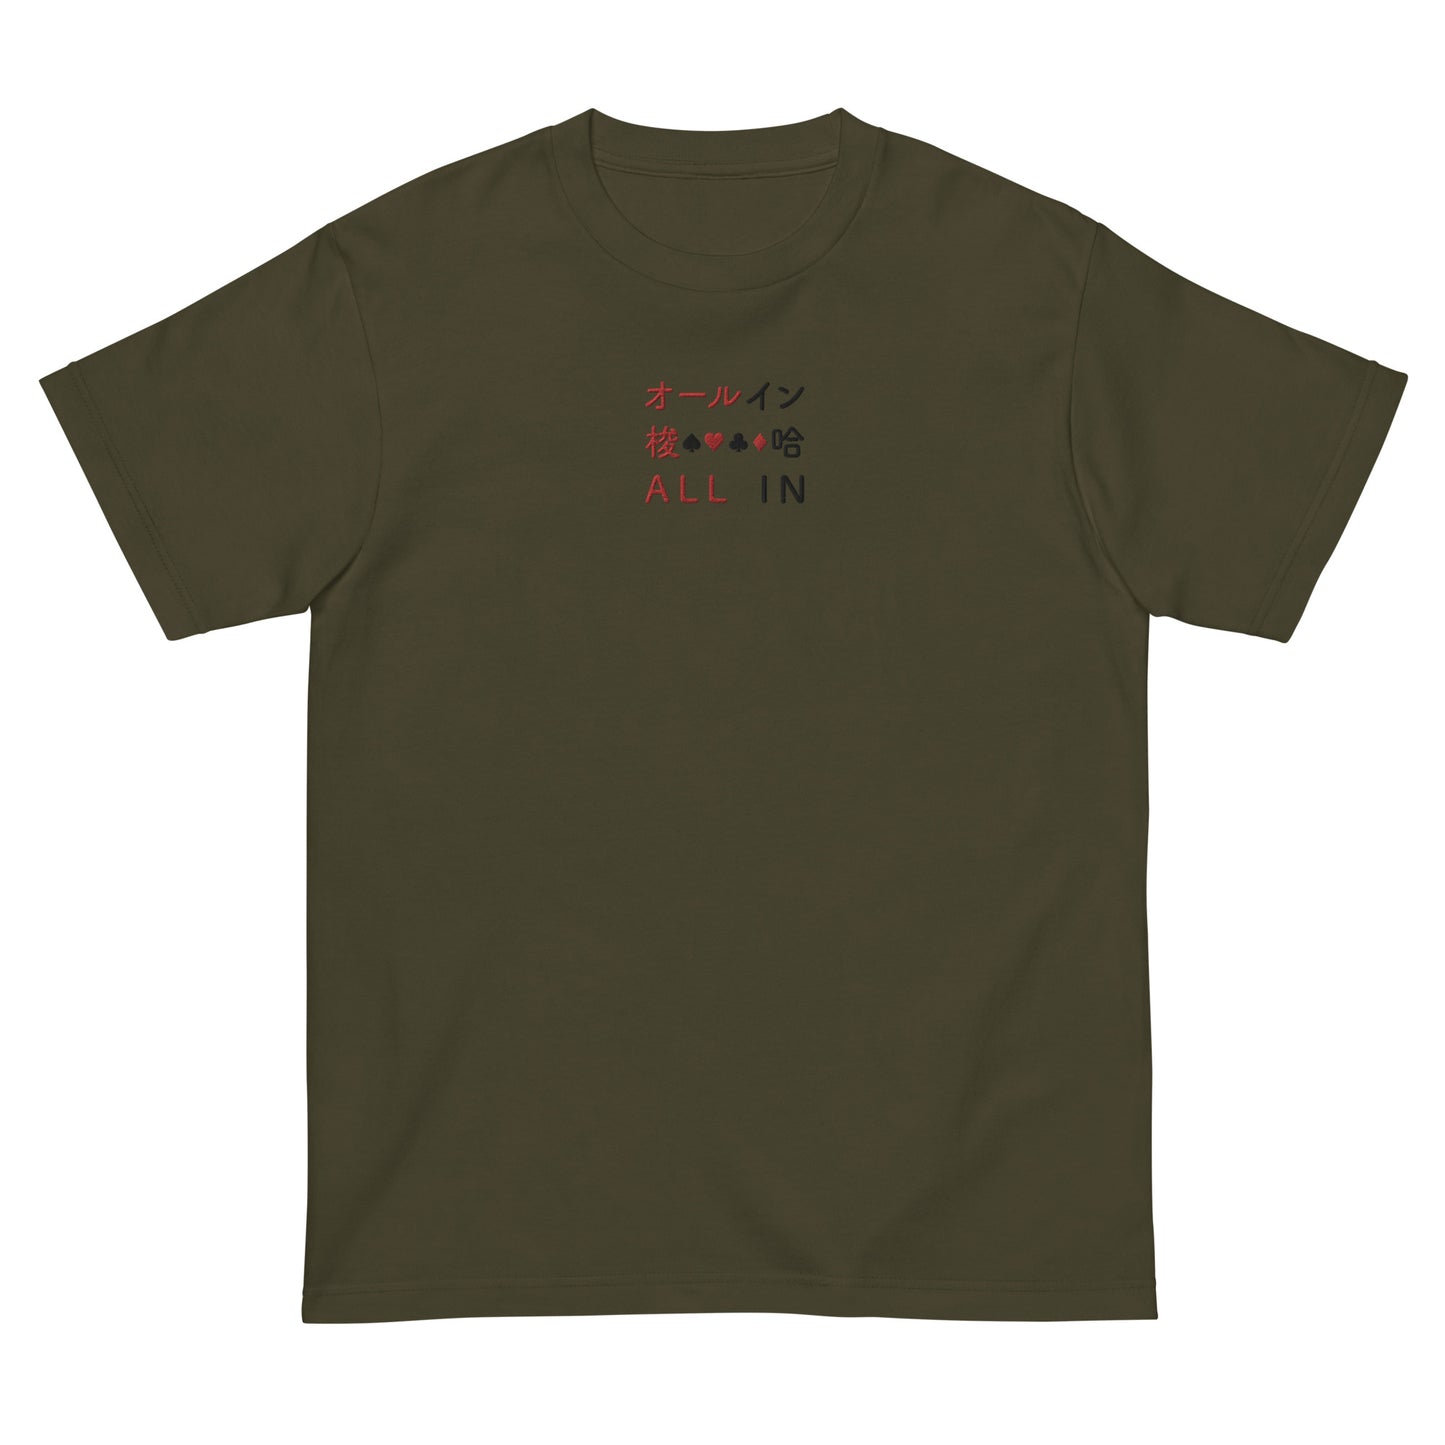 Green High Quality Tee - Front Design with an Red, Black Embroidery "All IN" in Japanese,Chinese and English